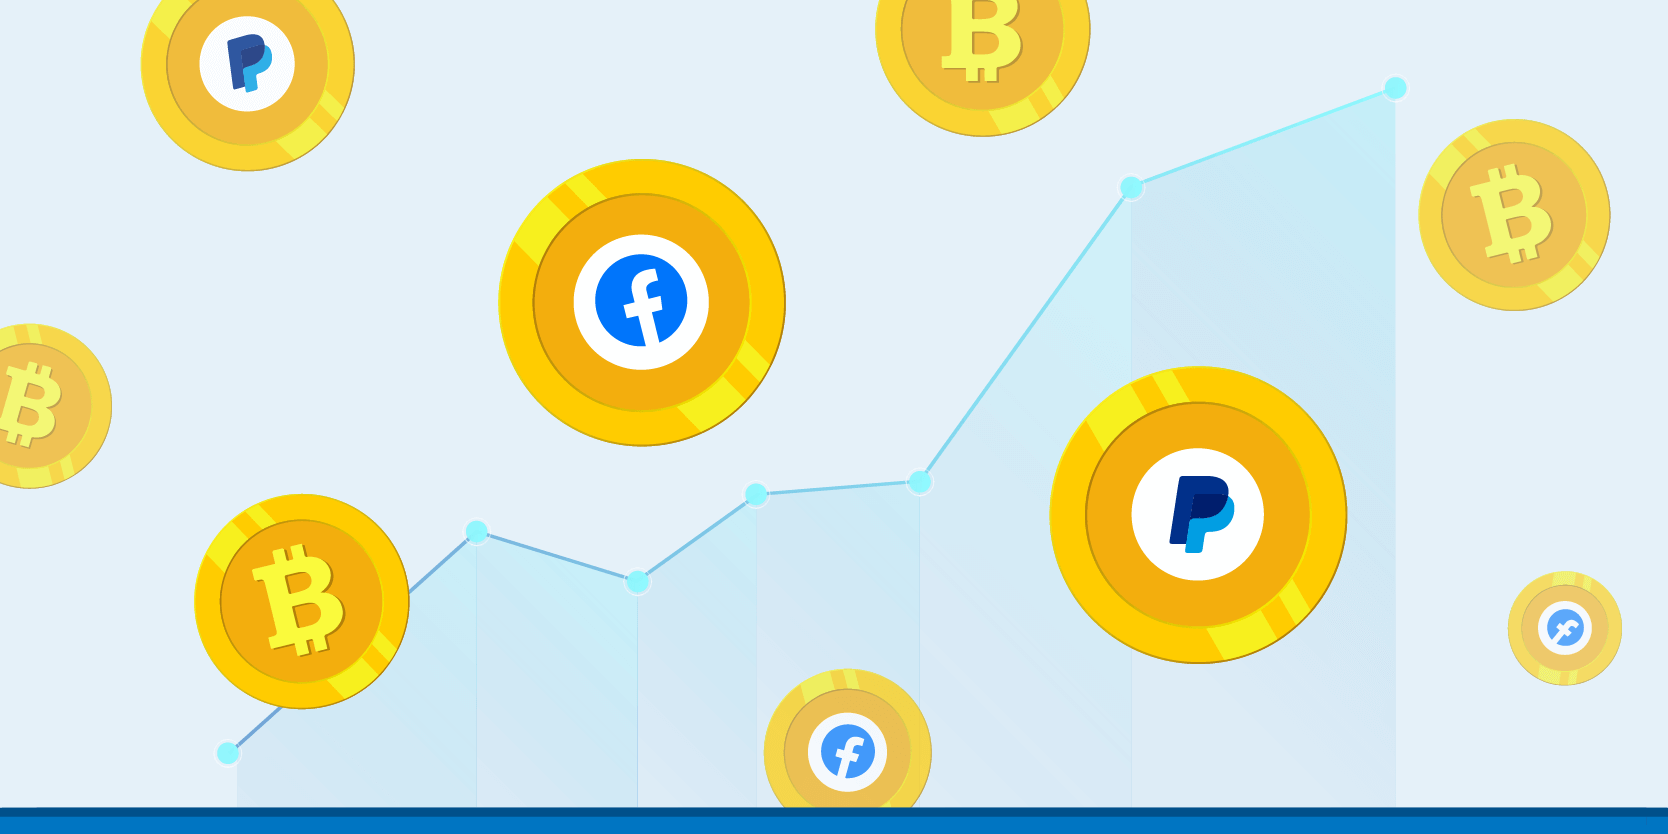 Facebook and Paypal logos on cryptocurrency